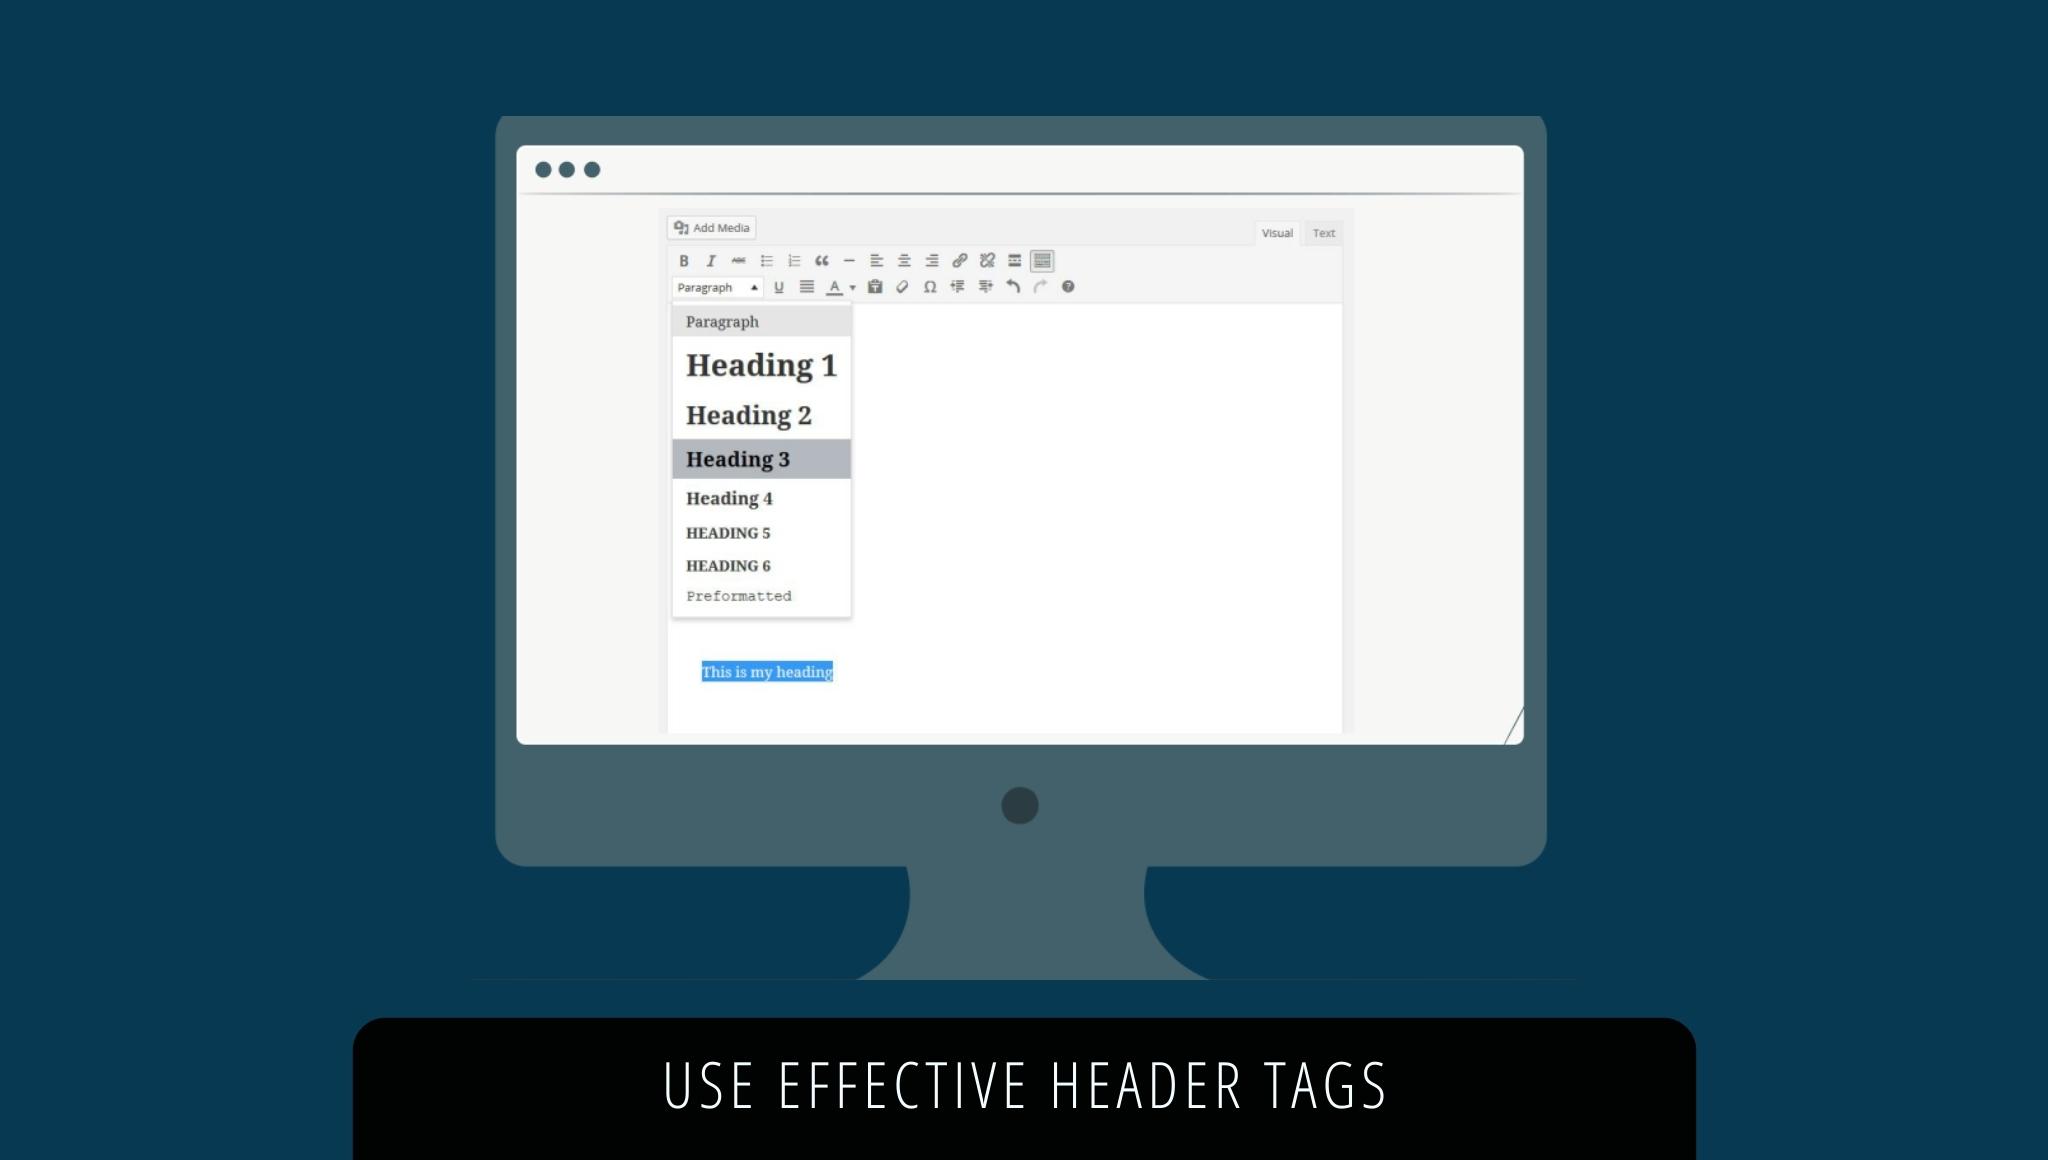 Use effective header tags